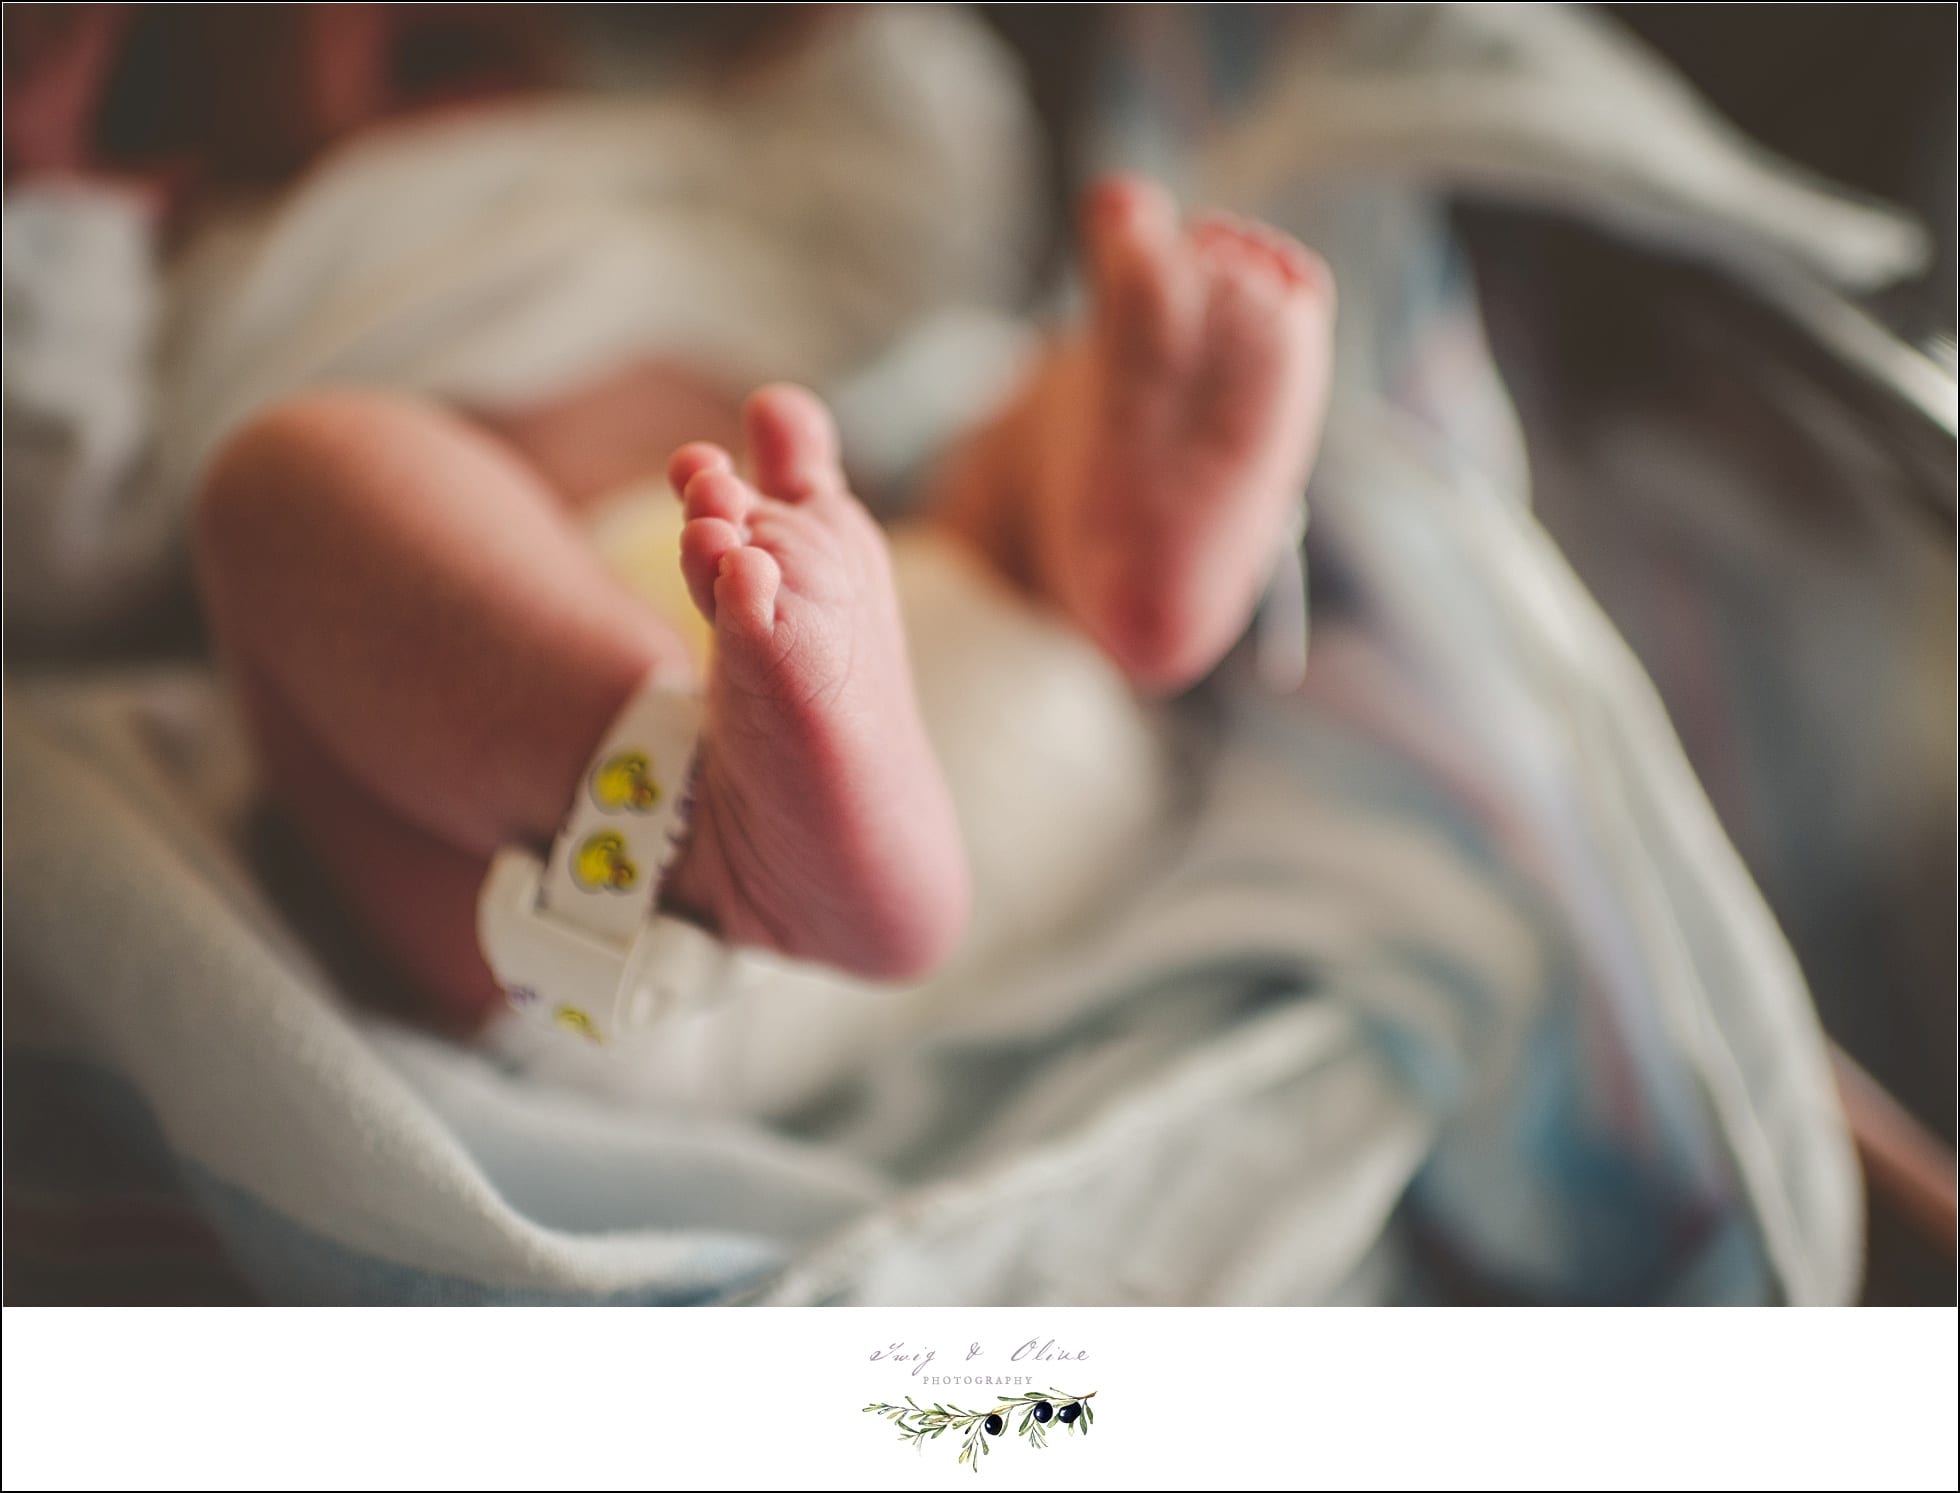 little feet, newly newborn newborns, swaddled, blankets, welcome to the world, 48 hours new, moments captured, TOP